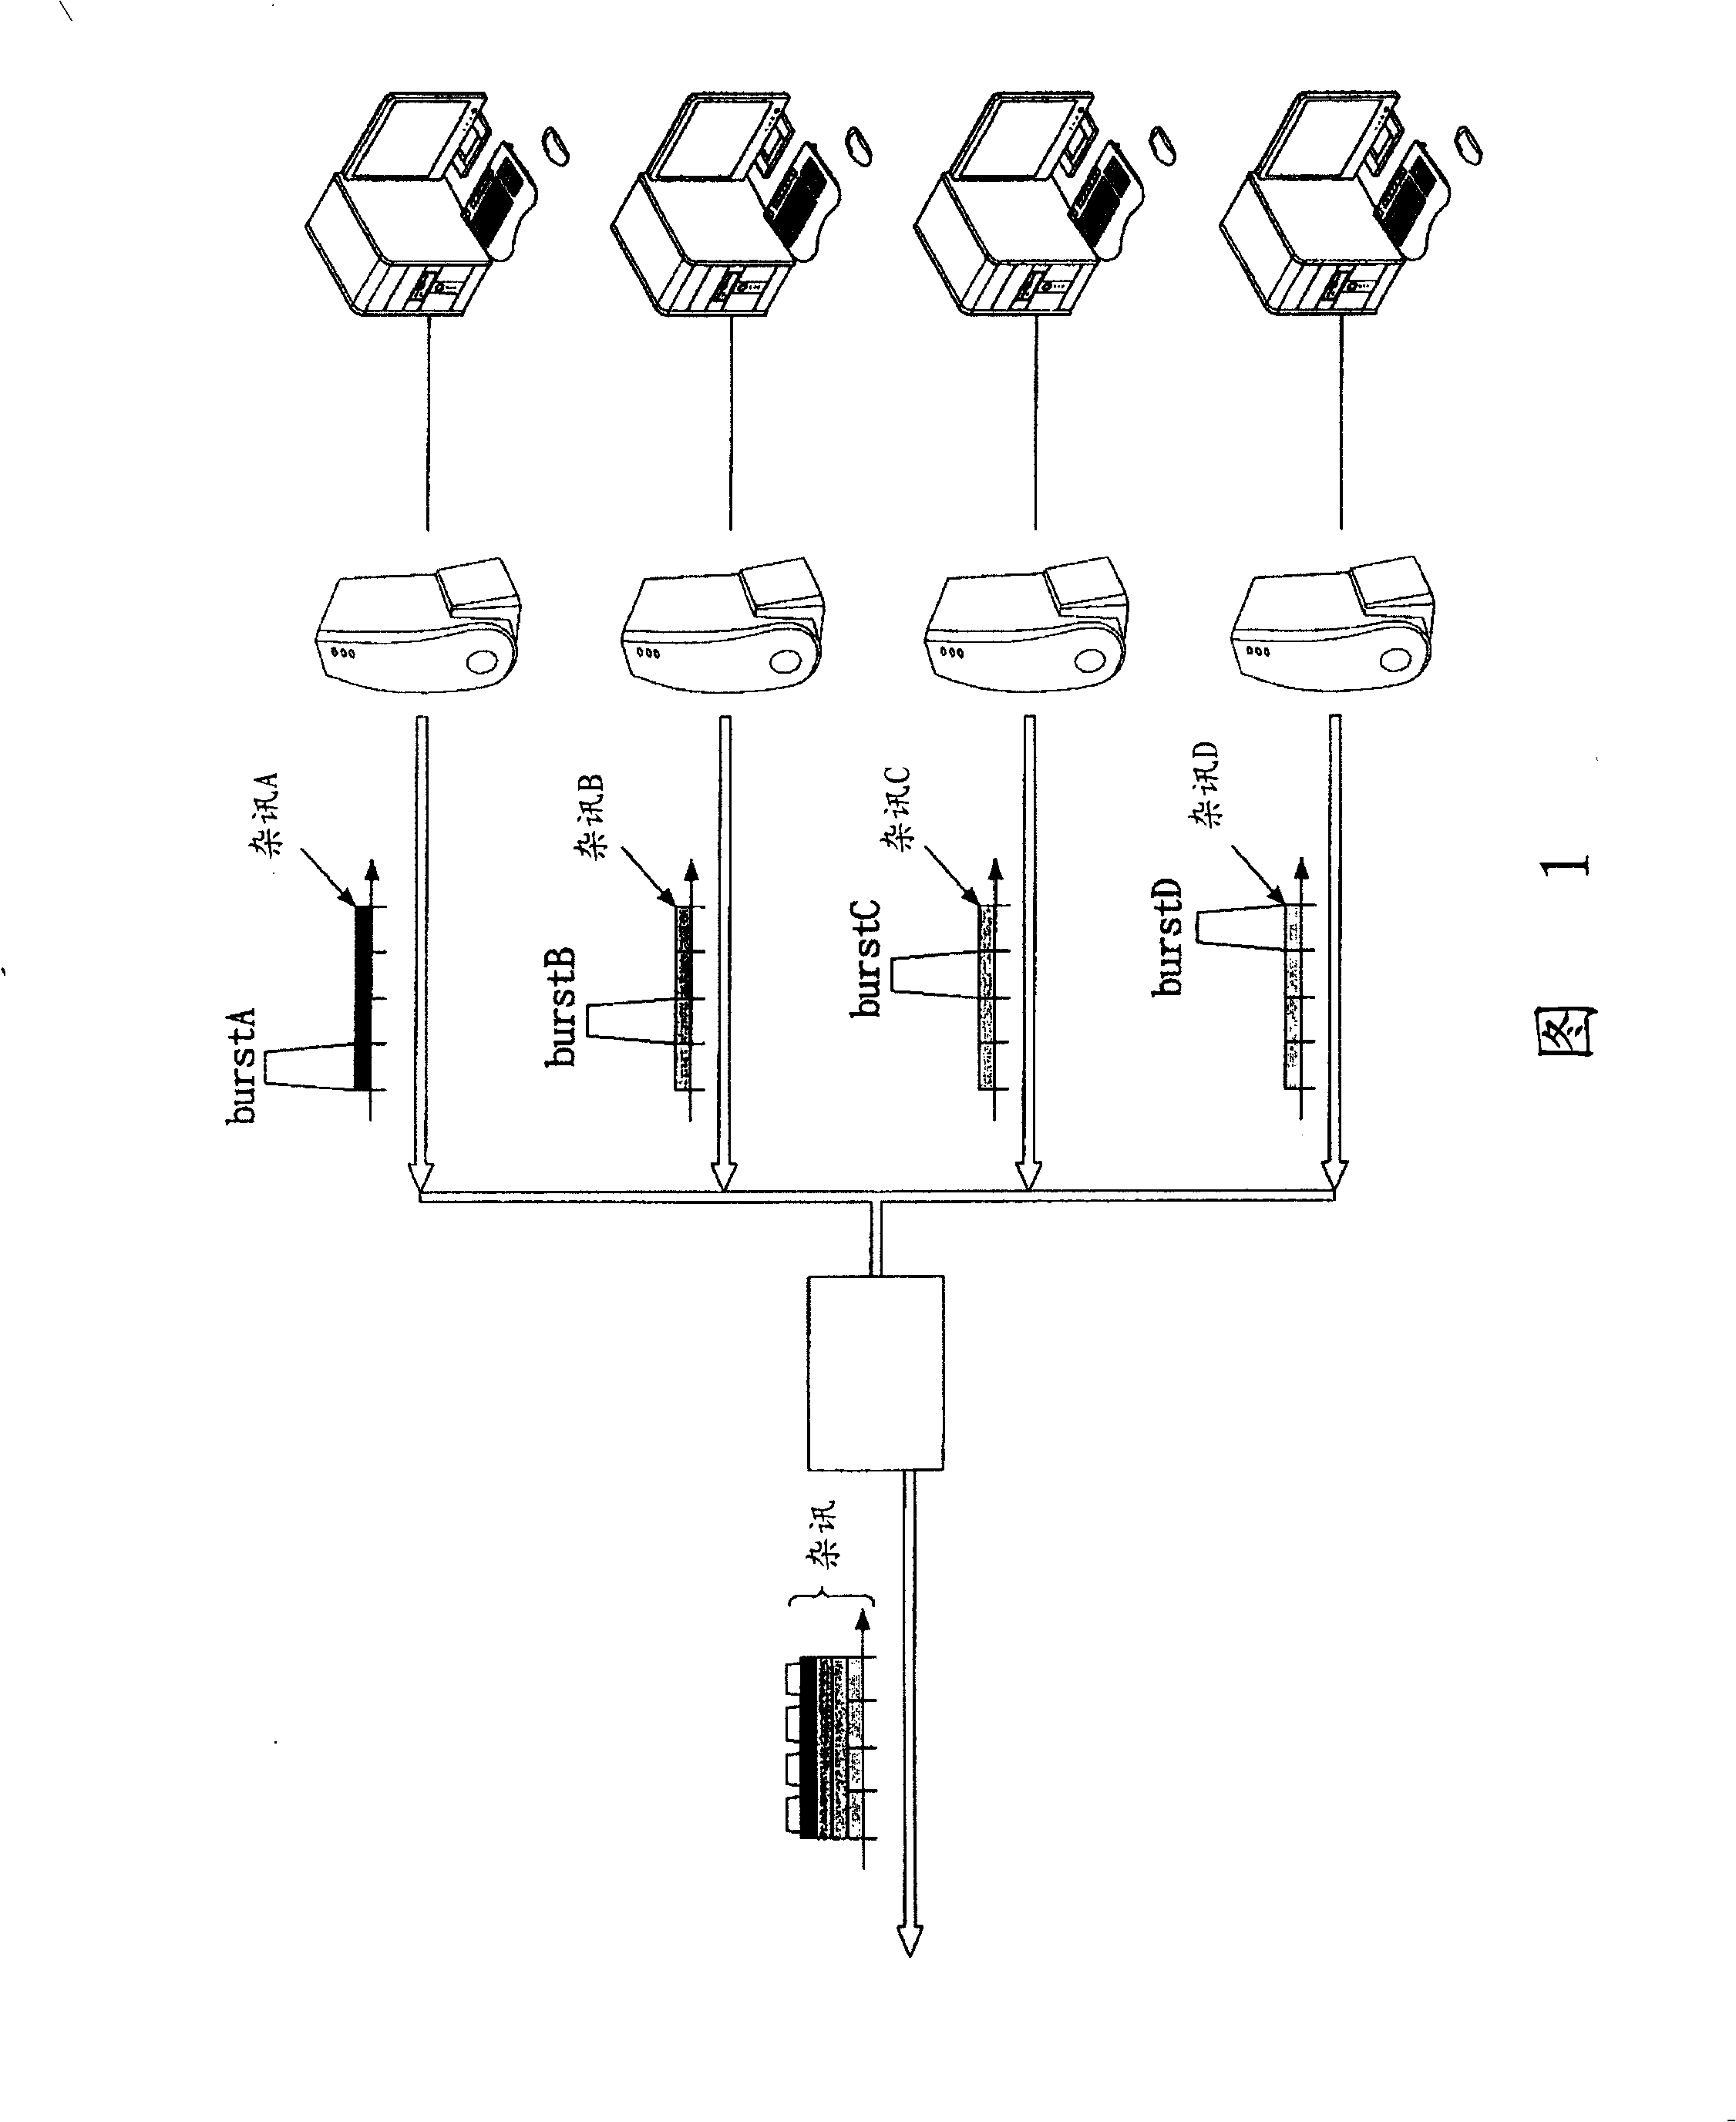 Method for reducing the uplink intrusion noise of cable data system